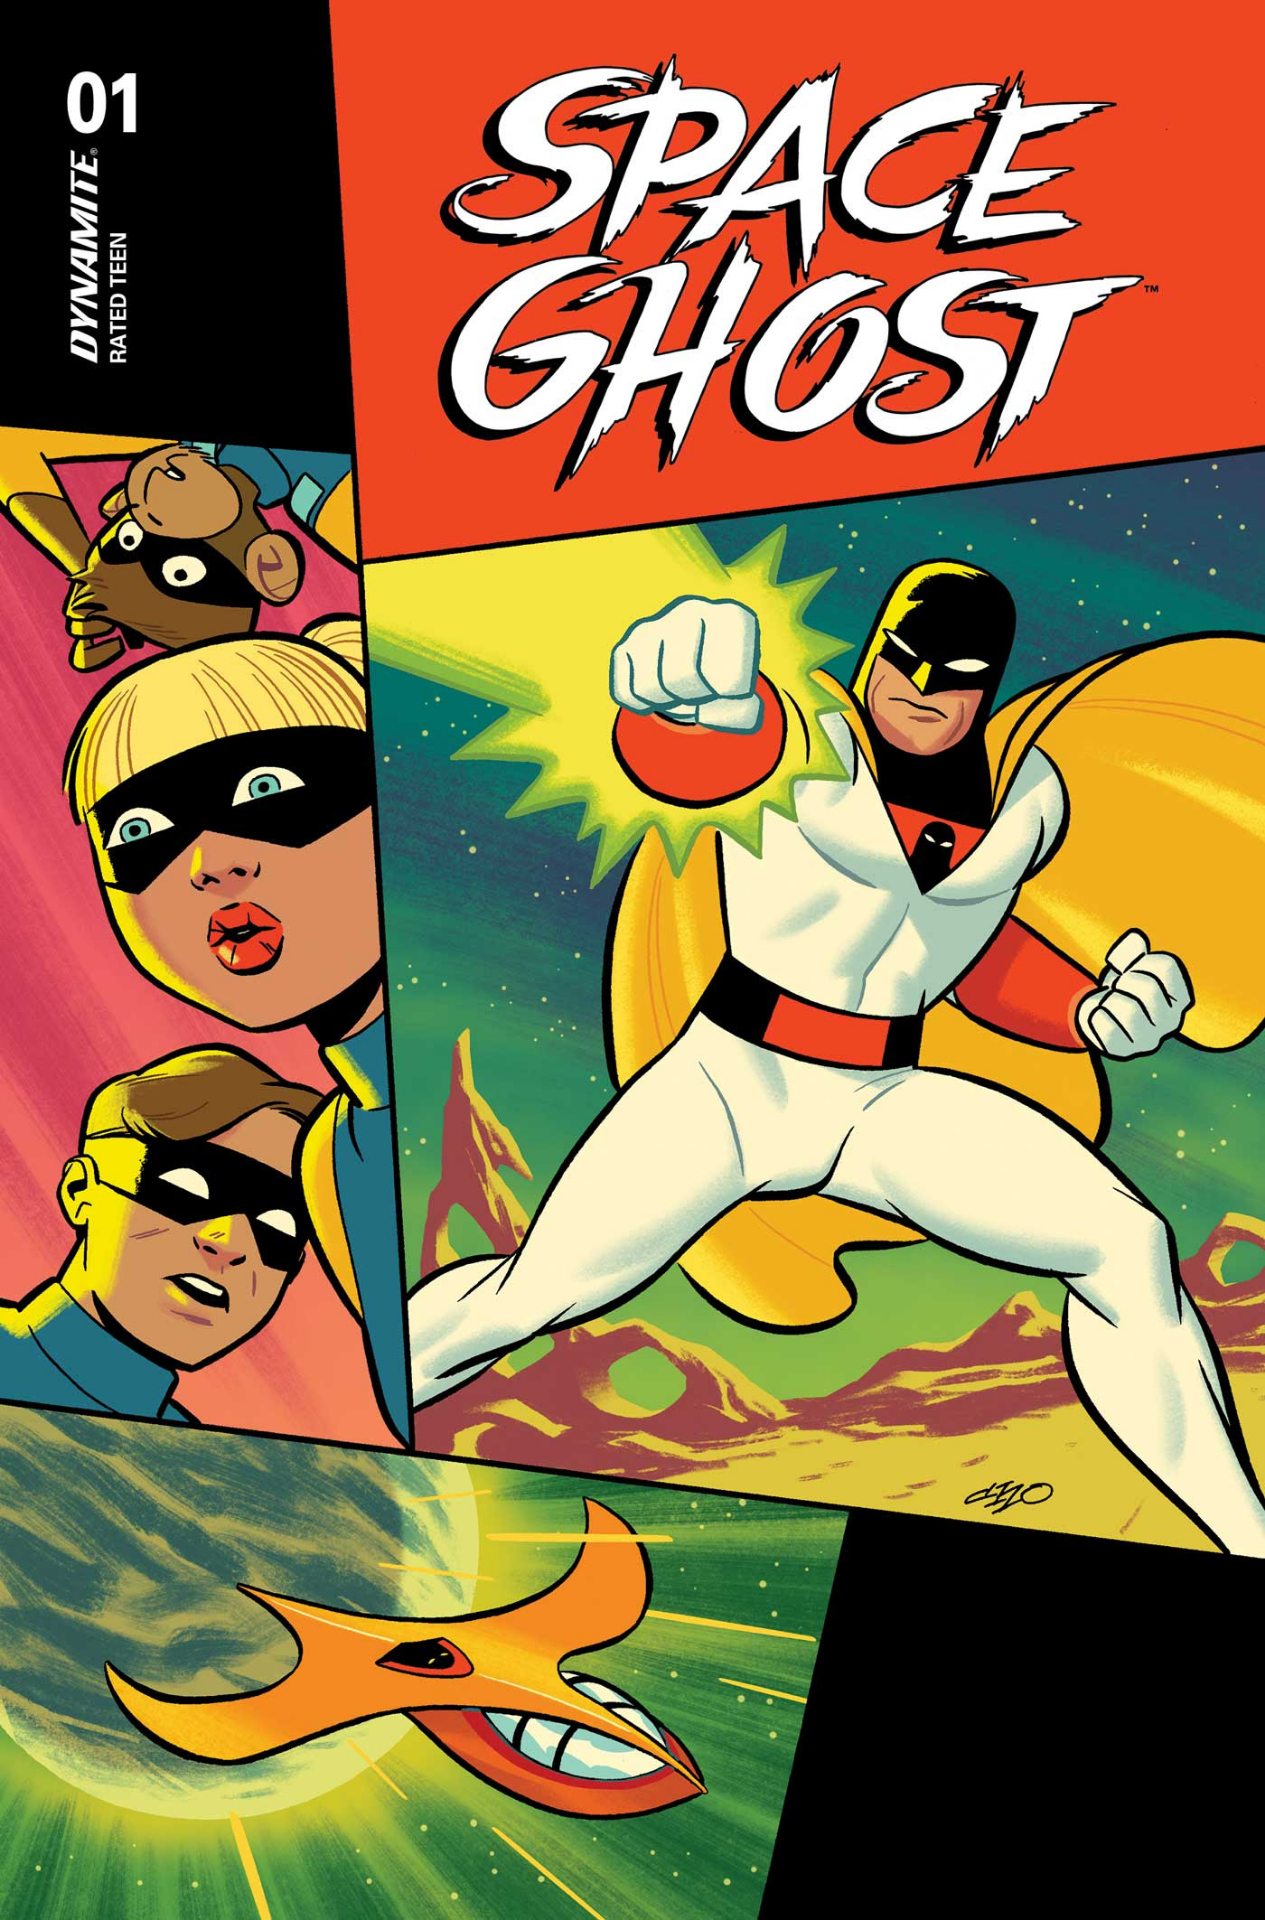 Space Ghost #1 cover af Michael Cho